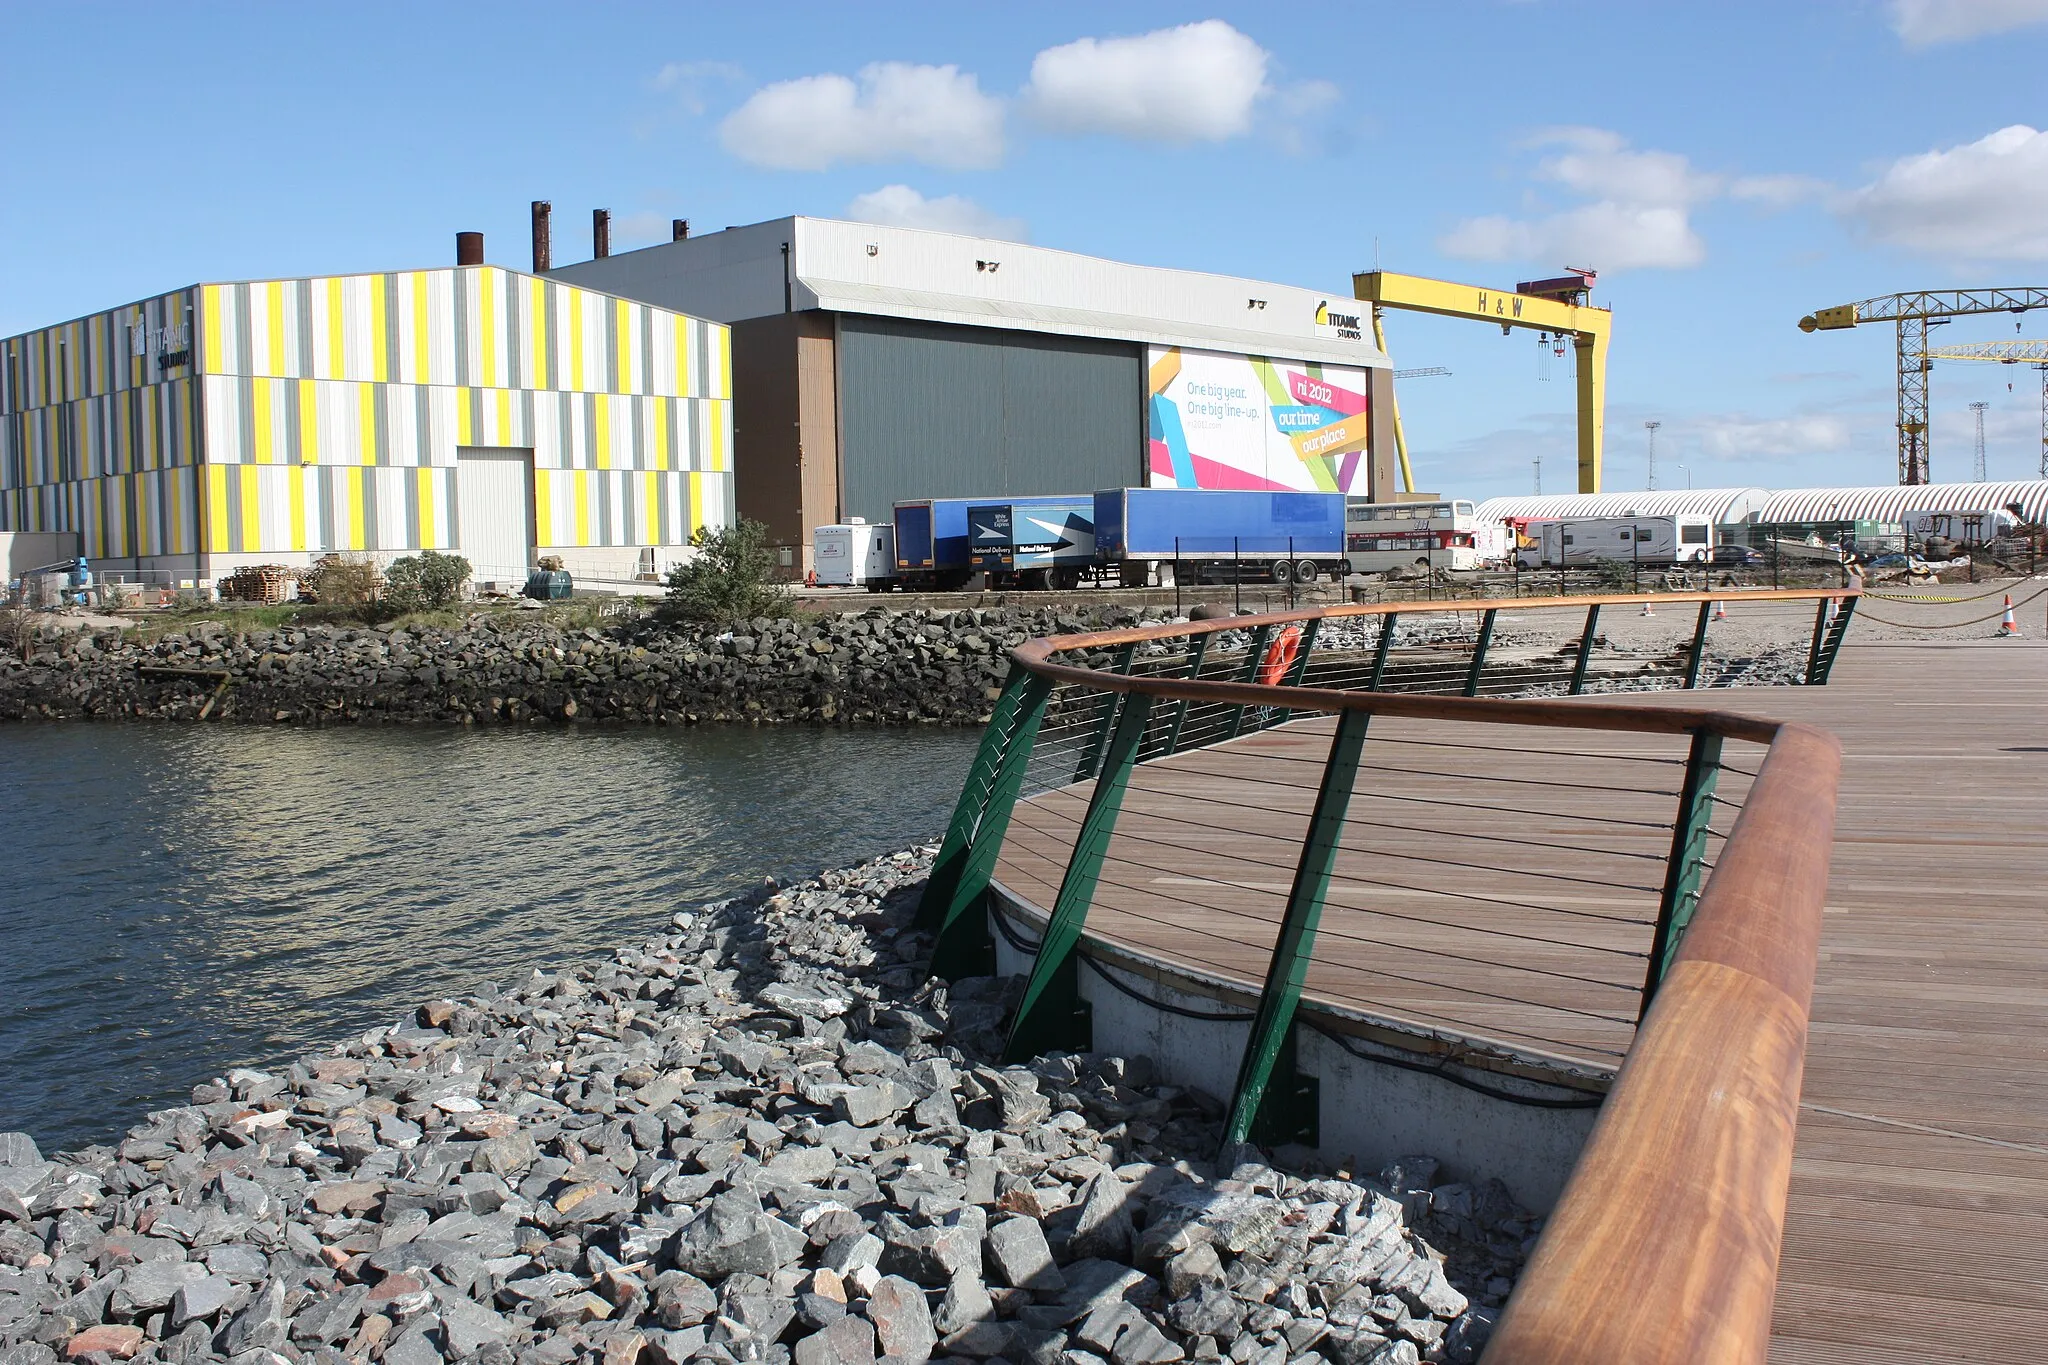 Photo showing: Titanic (formerly Paintshop) Studios and cranes viewed from the end of the Olympic Slipway, Opening Day at Titanic Belfast, Titanic Quarter, Queen's Road, Belfast, Northern Ireland, 31 March 2012